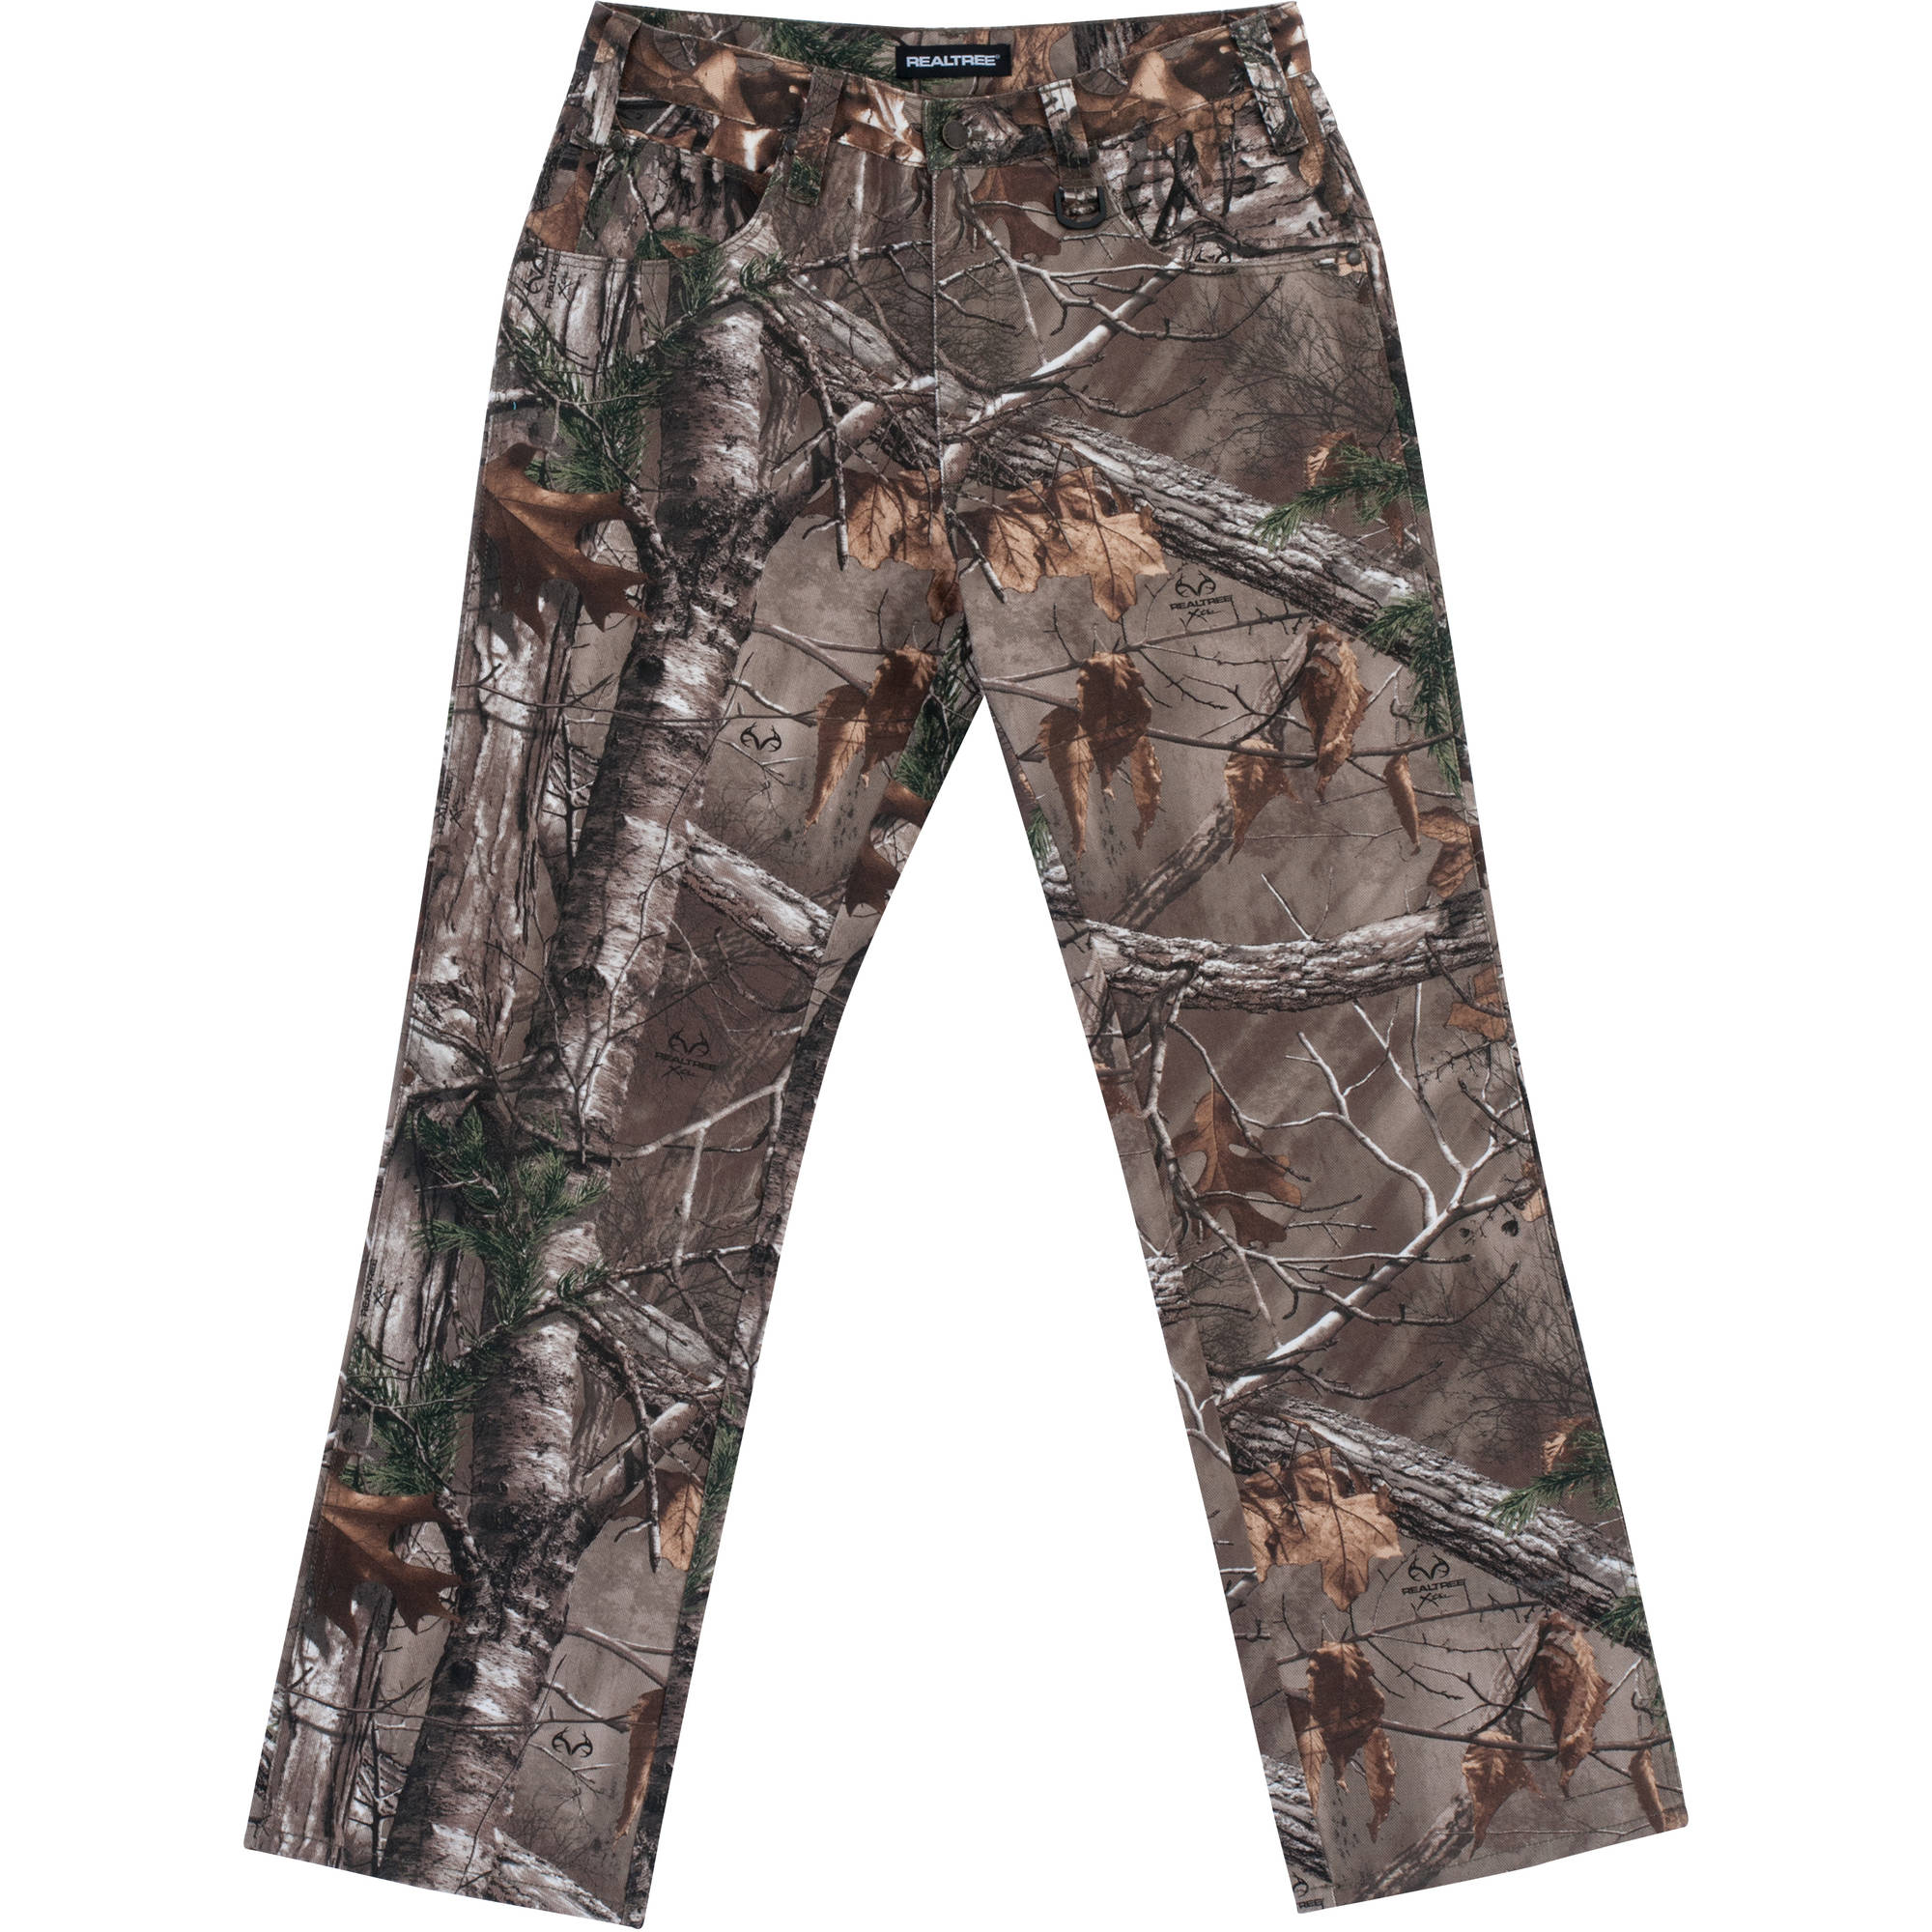 Men's 5-Pocket Pants, Available in and Mossy Oak - image 1 of 1